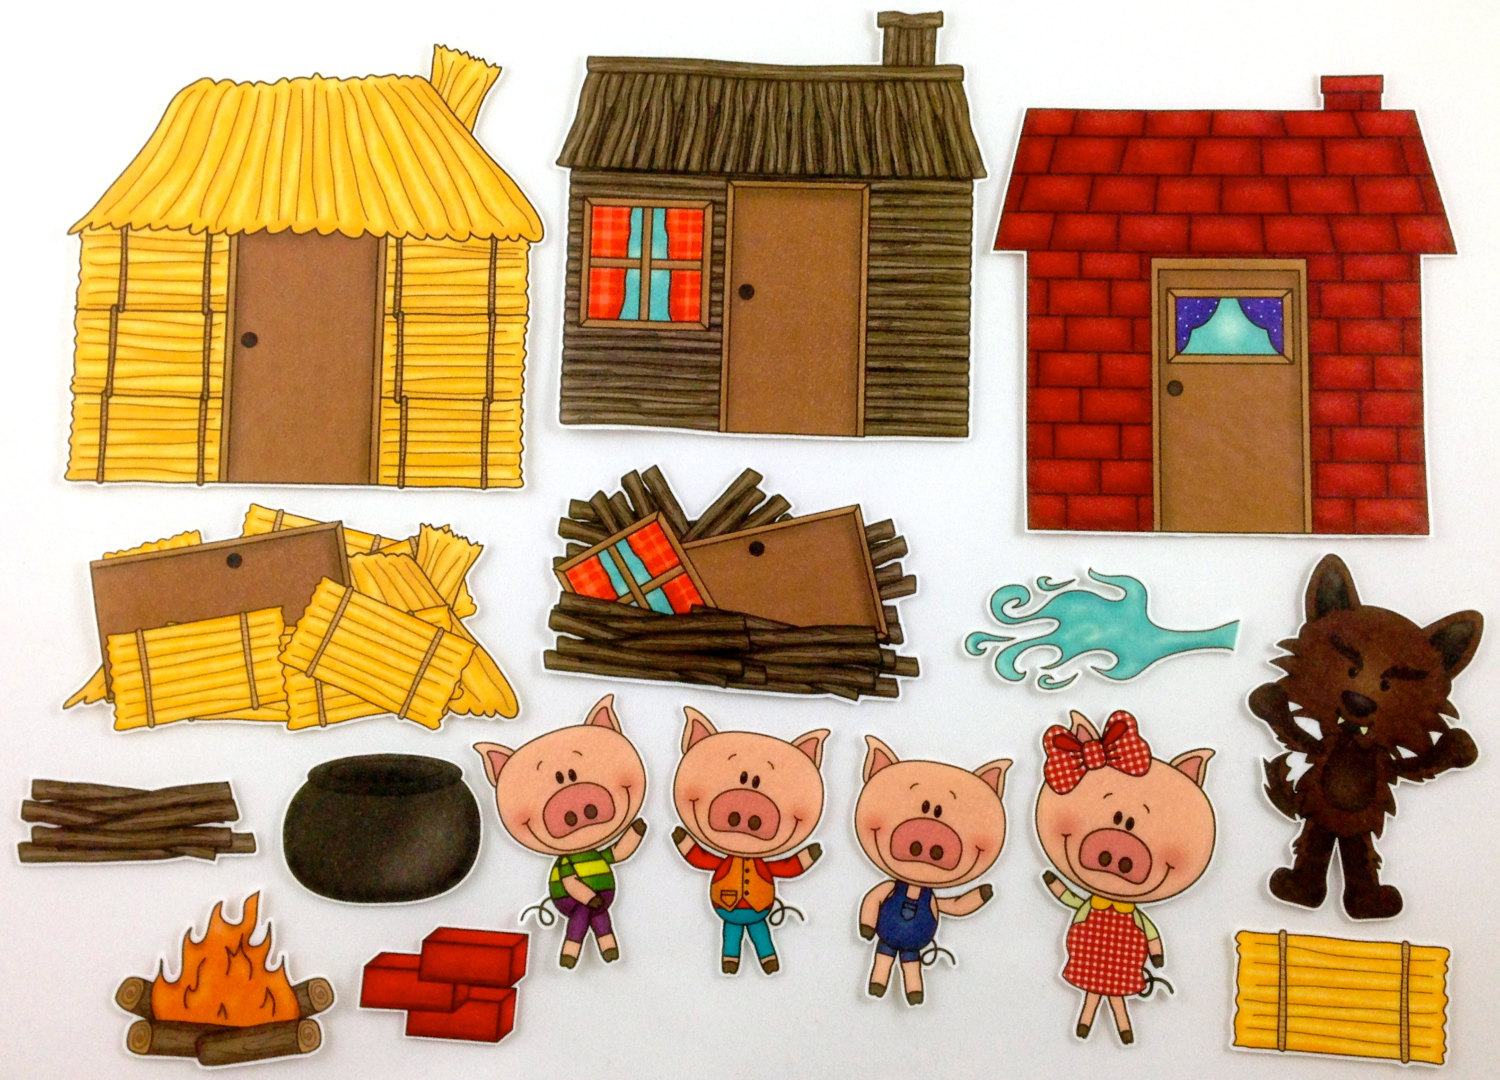 Popular items for three little pigs on Etsy